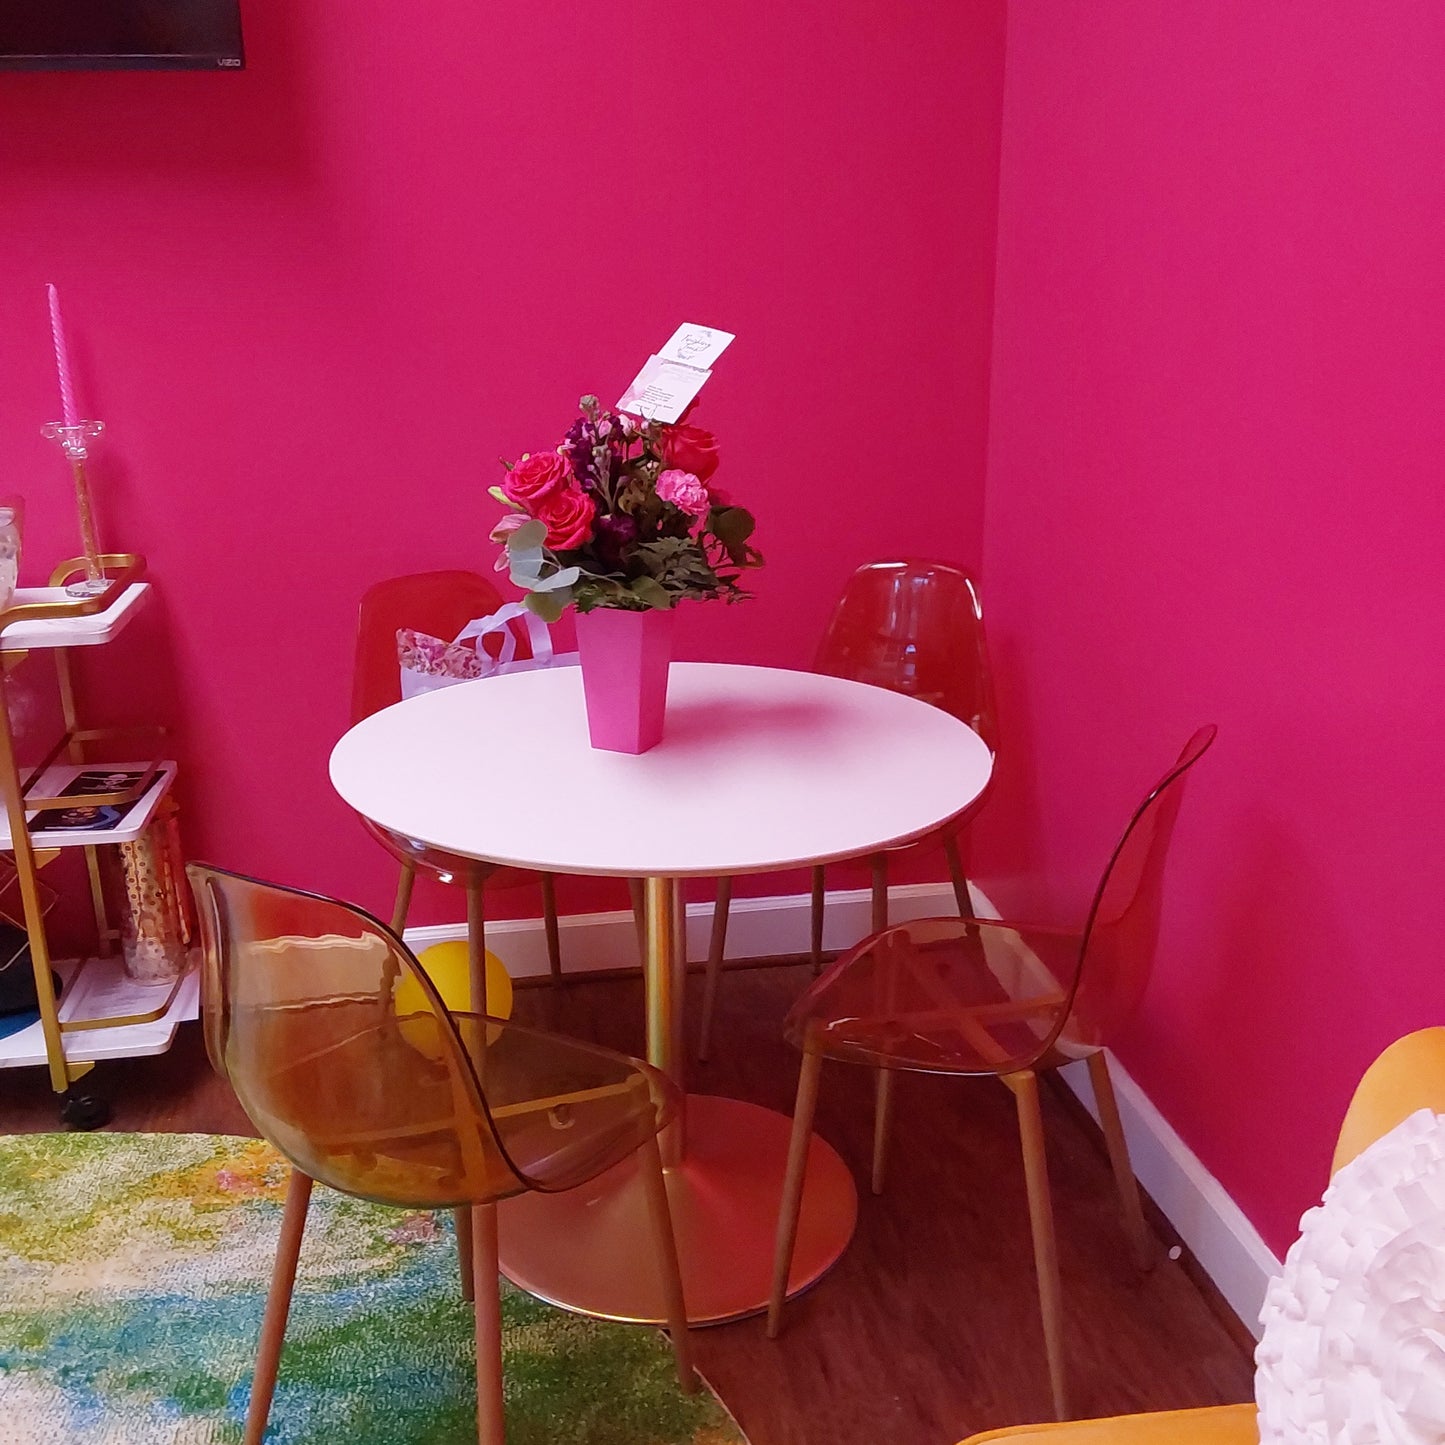 Pink Moscato Room - Available To Rent - 2hr Minimum